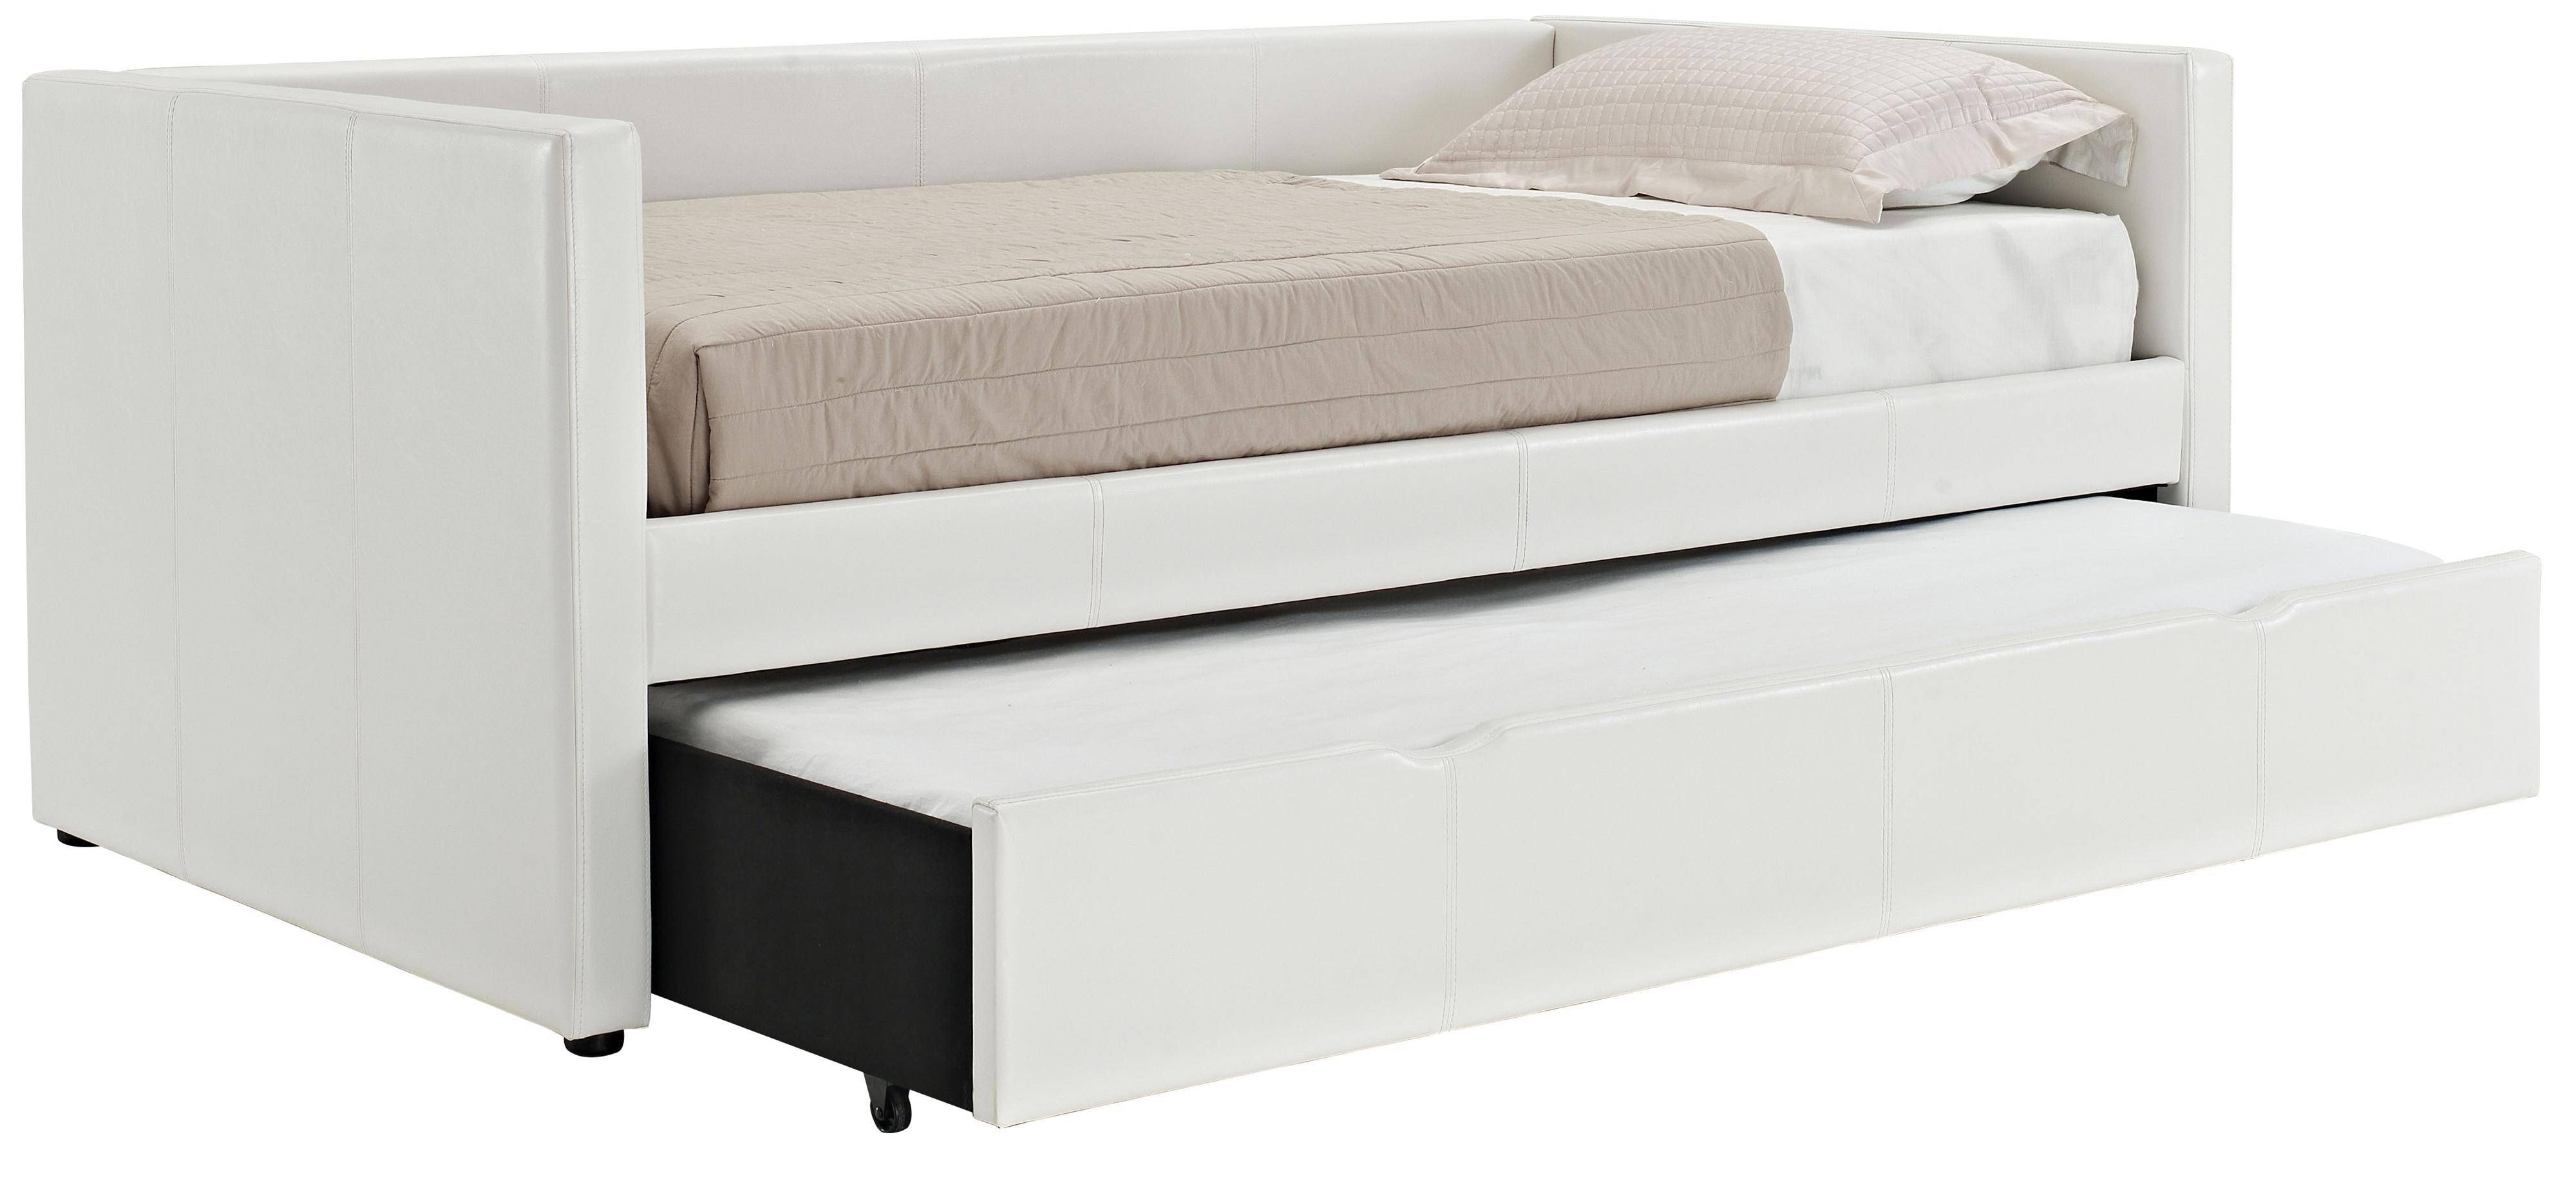 Standard Furniture Lindsey Twin Upholstered Daybed With Trundle Pertaining To Sofas Daybed With Trundle (View 6 of 15)